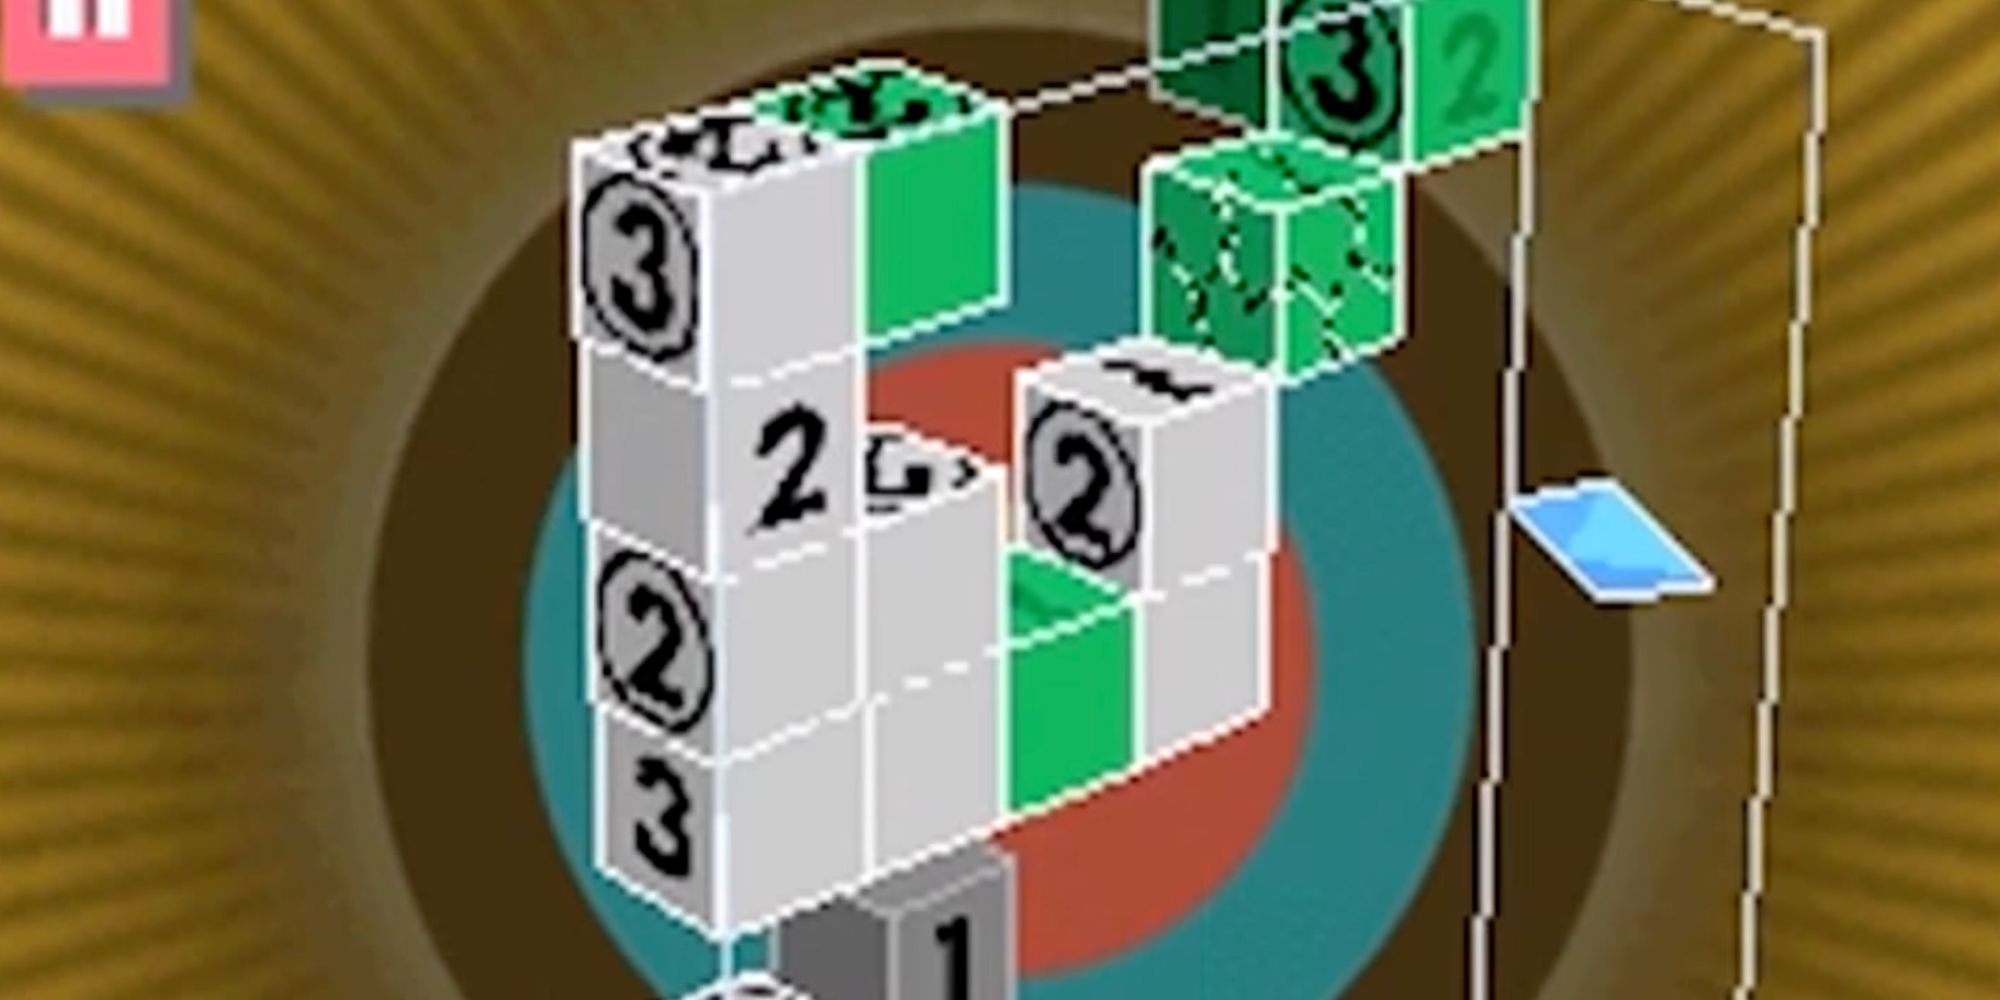 A screenshot from Picross 3D, showing a field of 3D blocks that must be formed into a shape